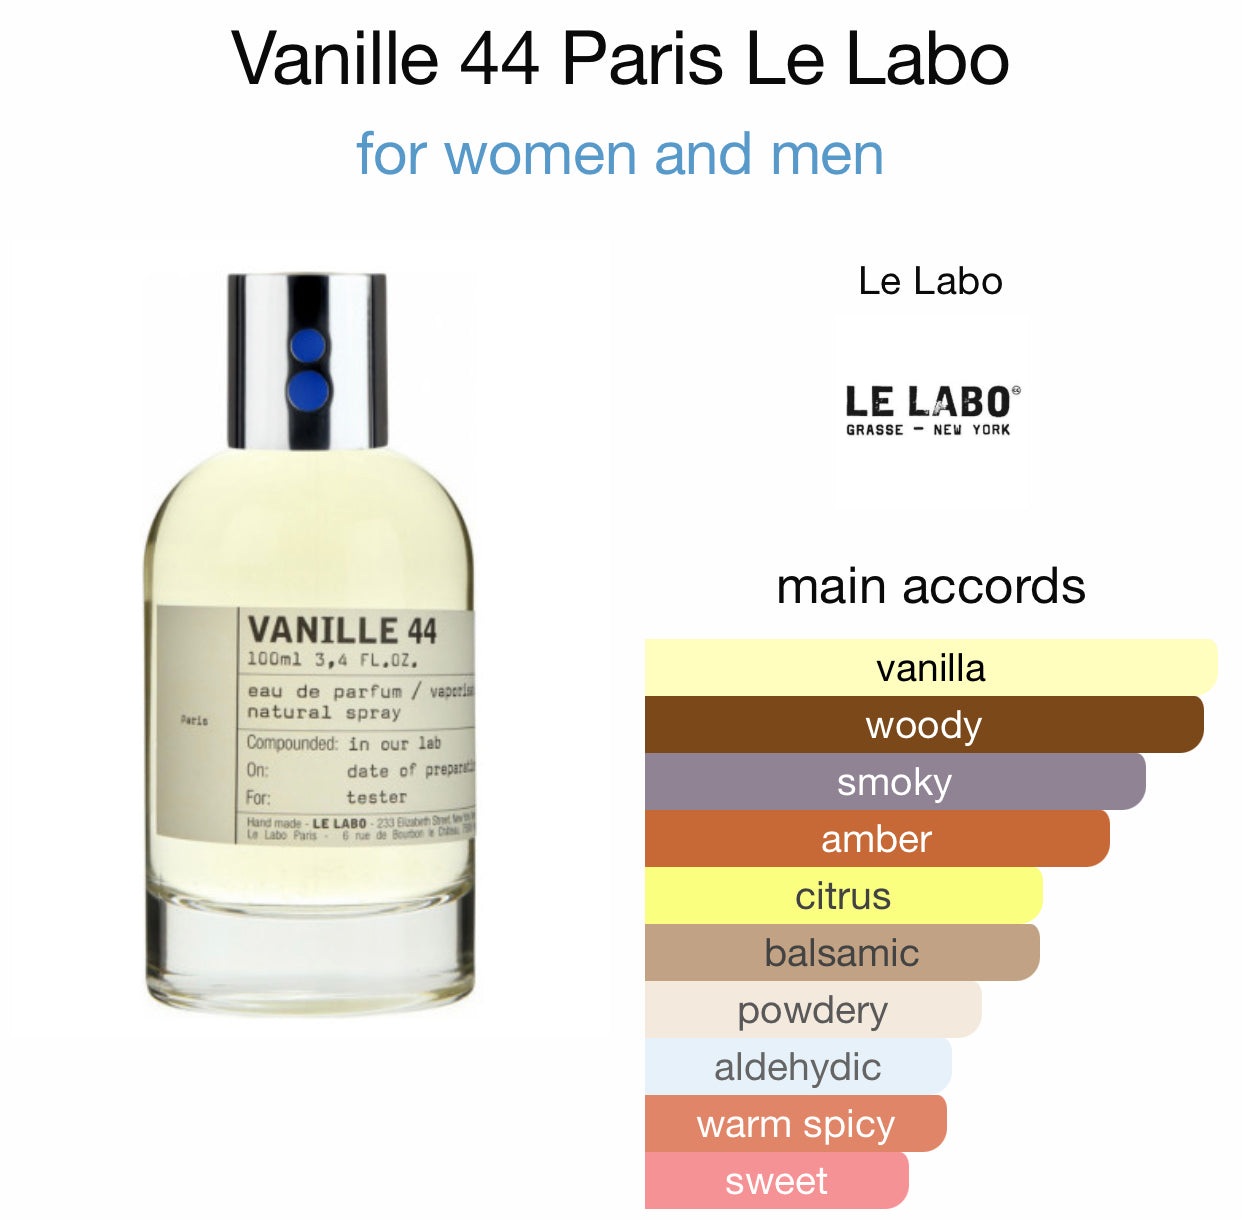 Inspired by Vanille 44 from Le Labo